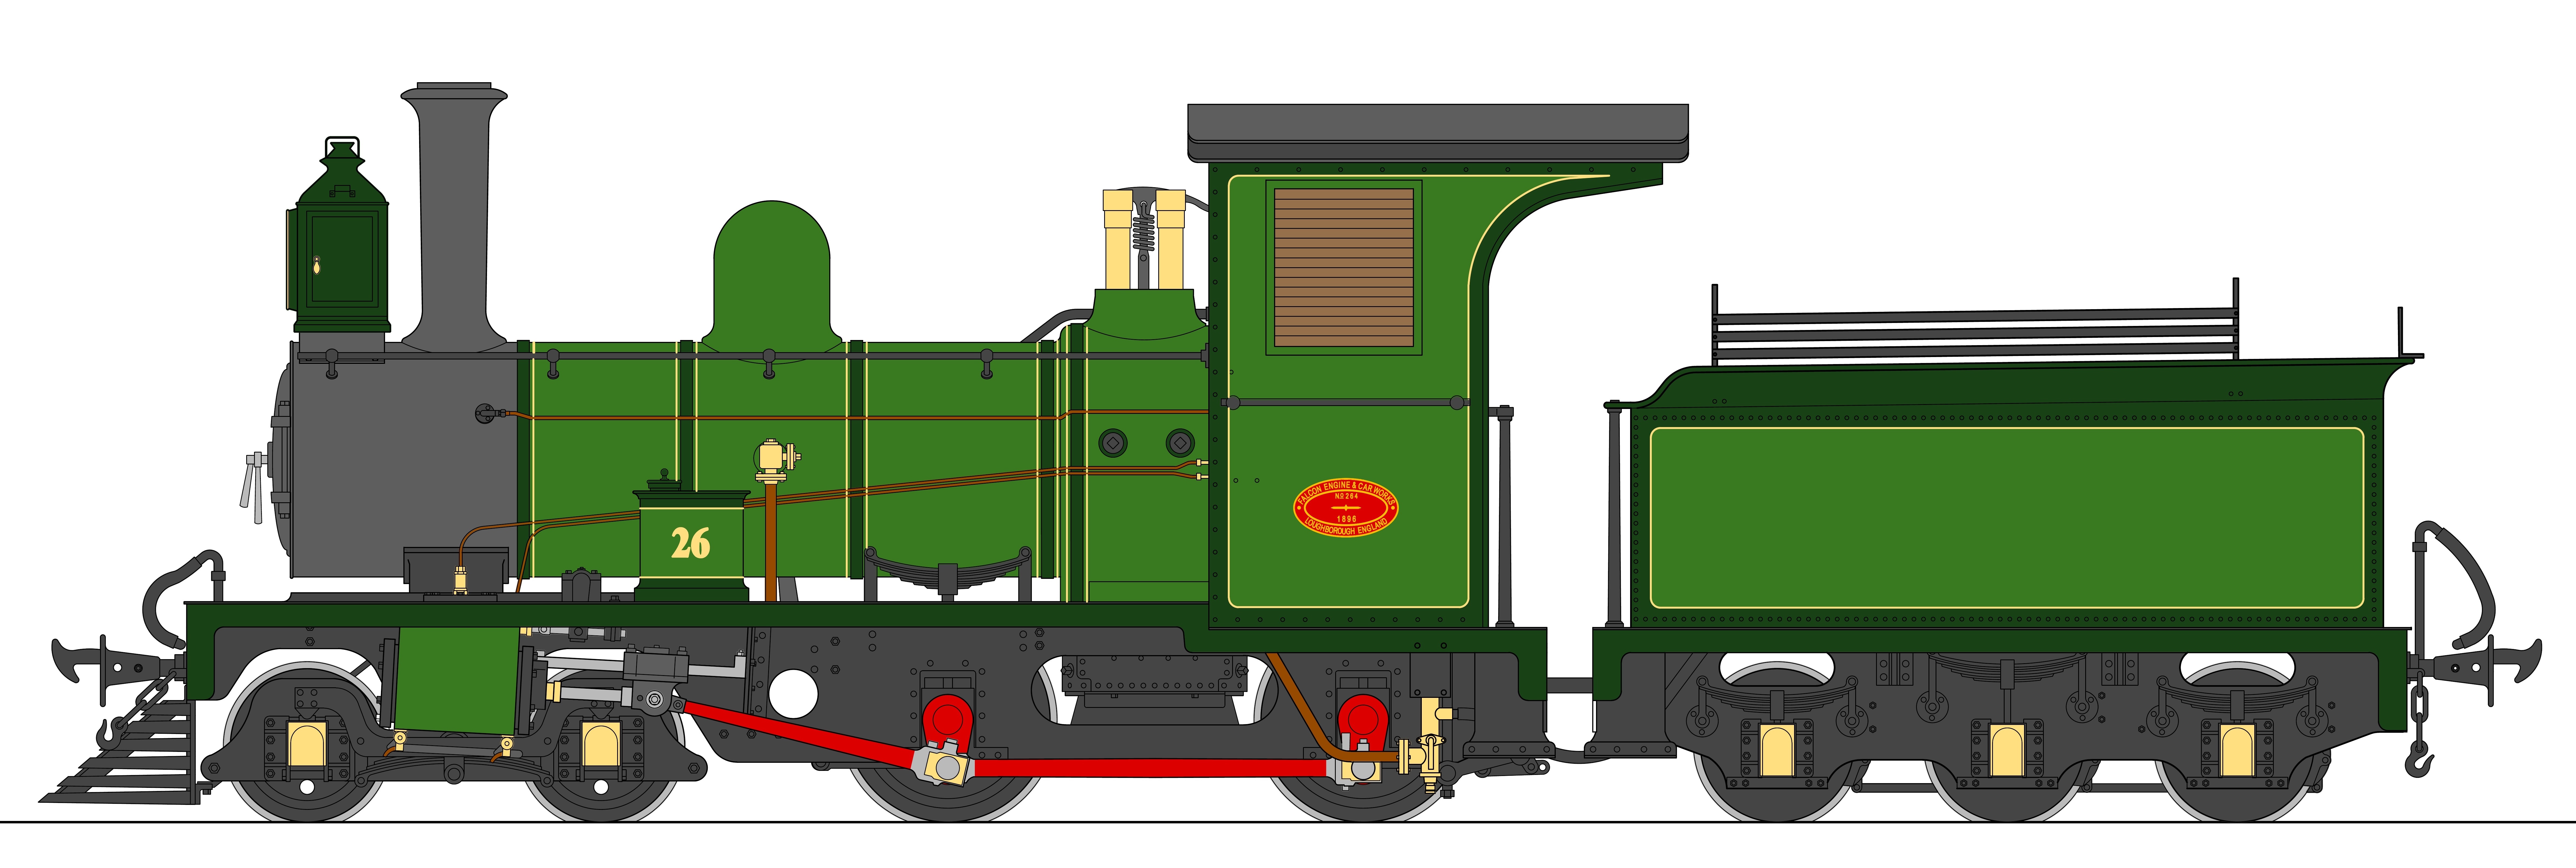 Freelance Live Steam KIT Accucraft Trains Ruby 0-4-0 